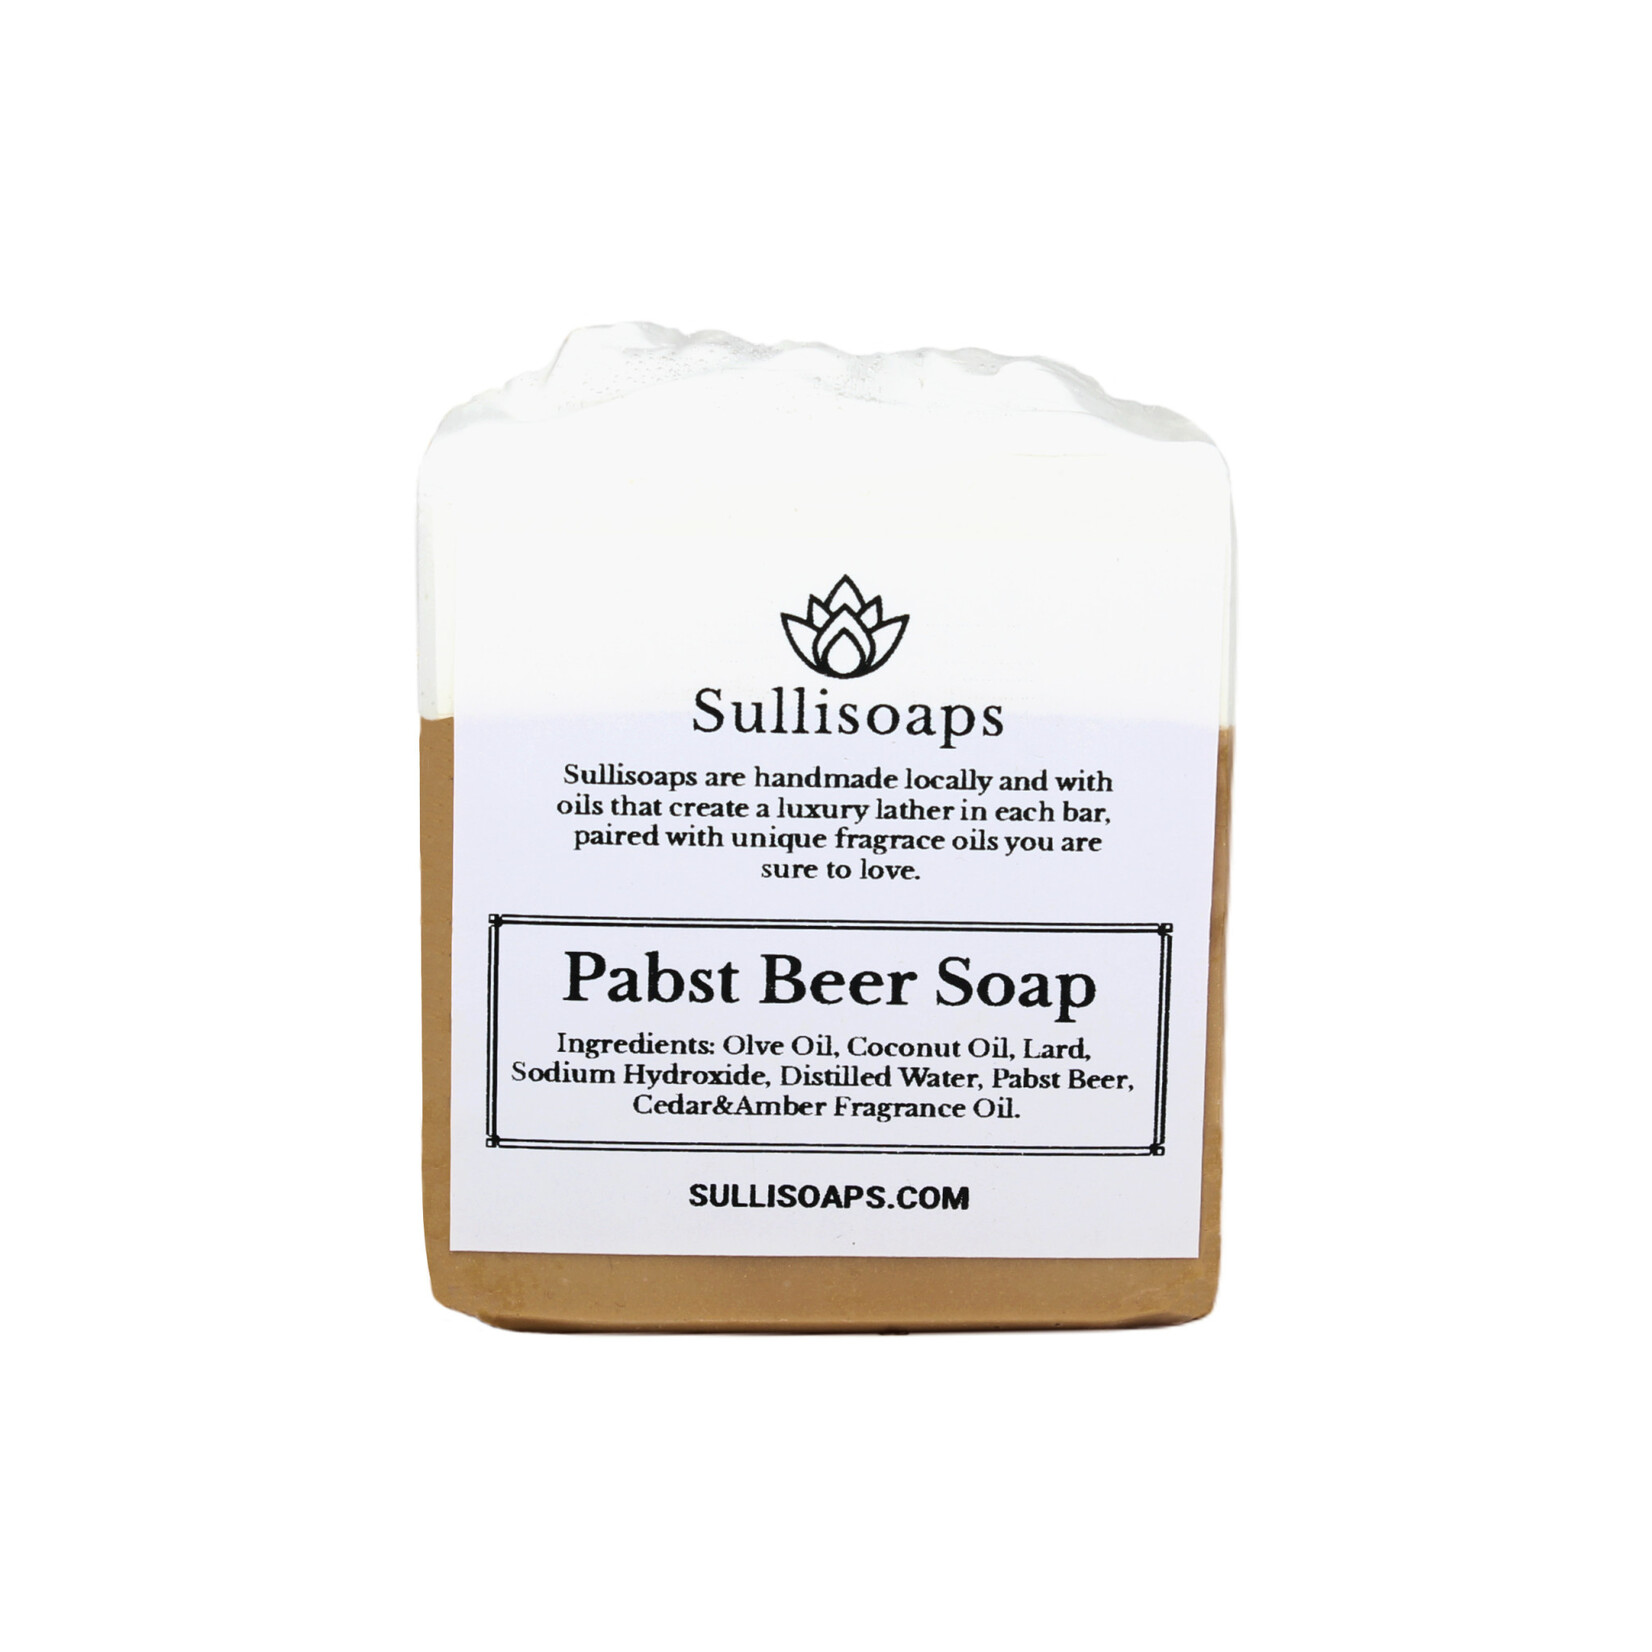 Pabst Beer Soap